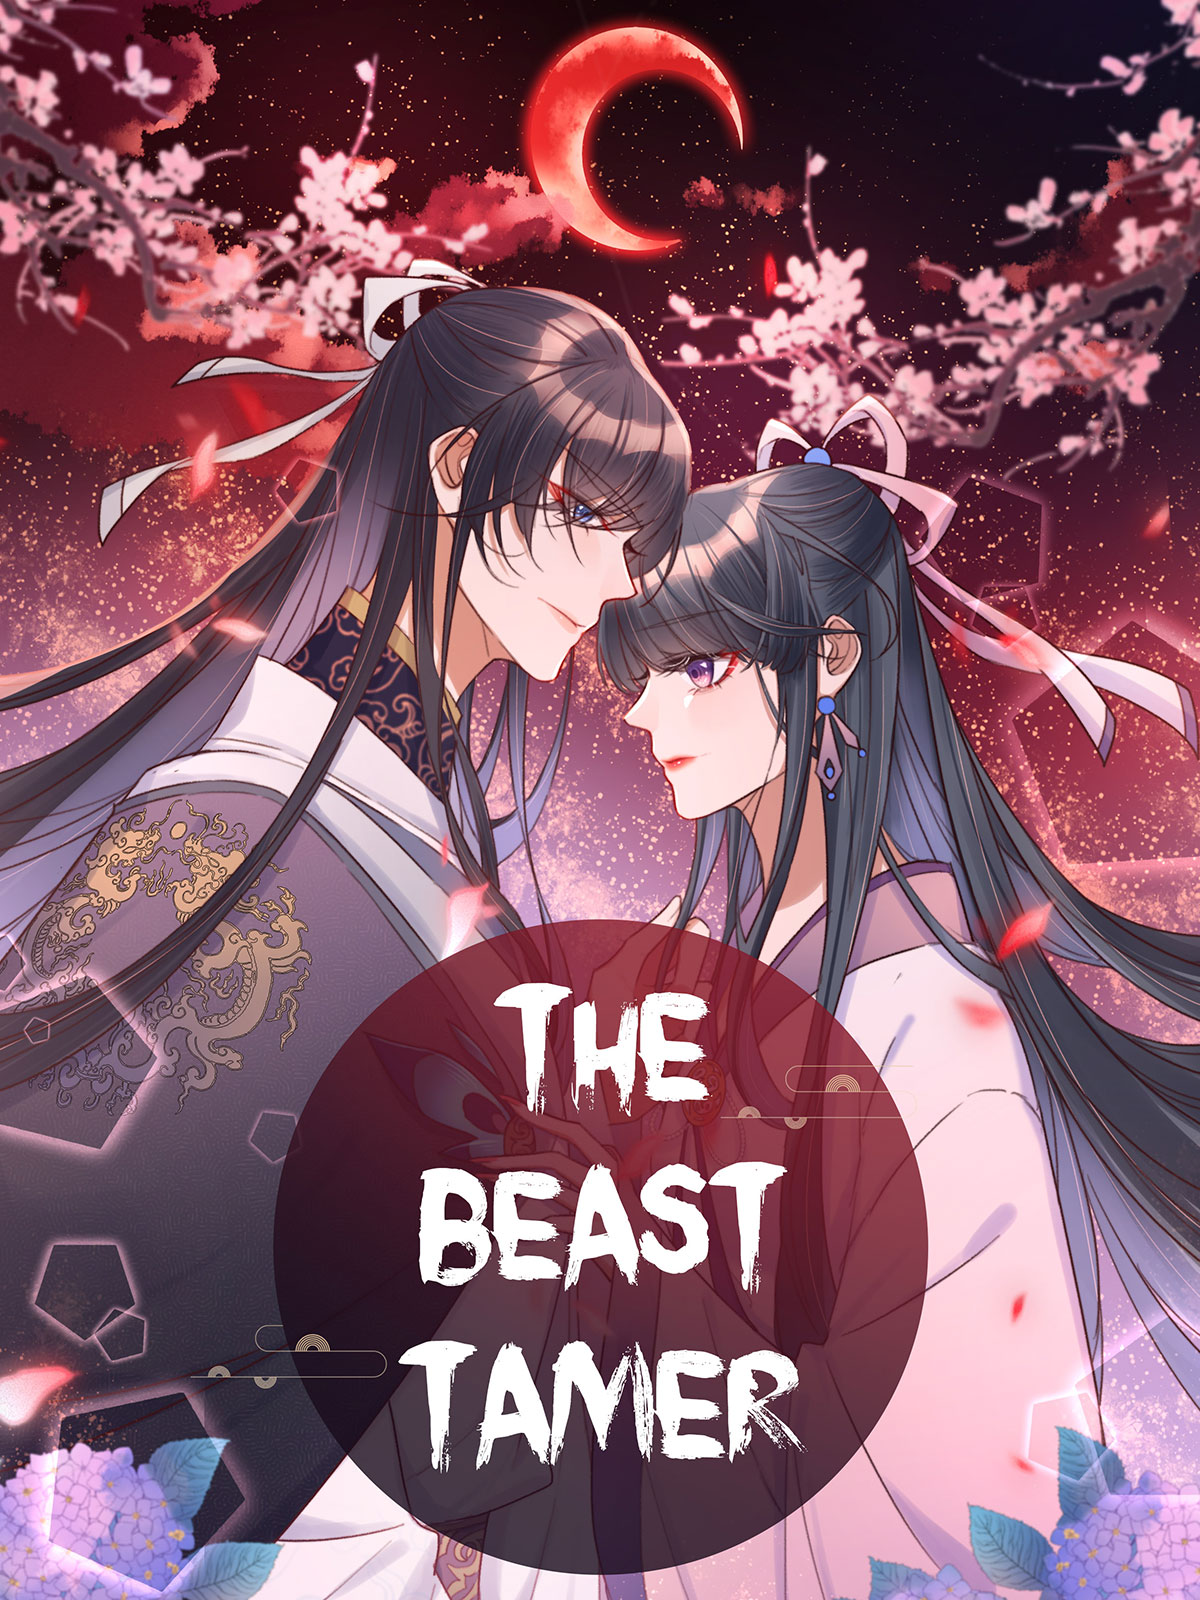 How Many Episodes Will Beast Tamer Have?